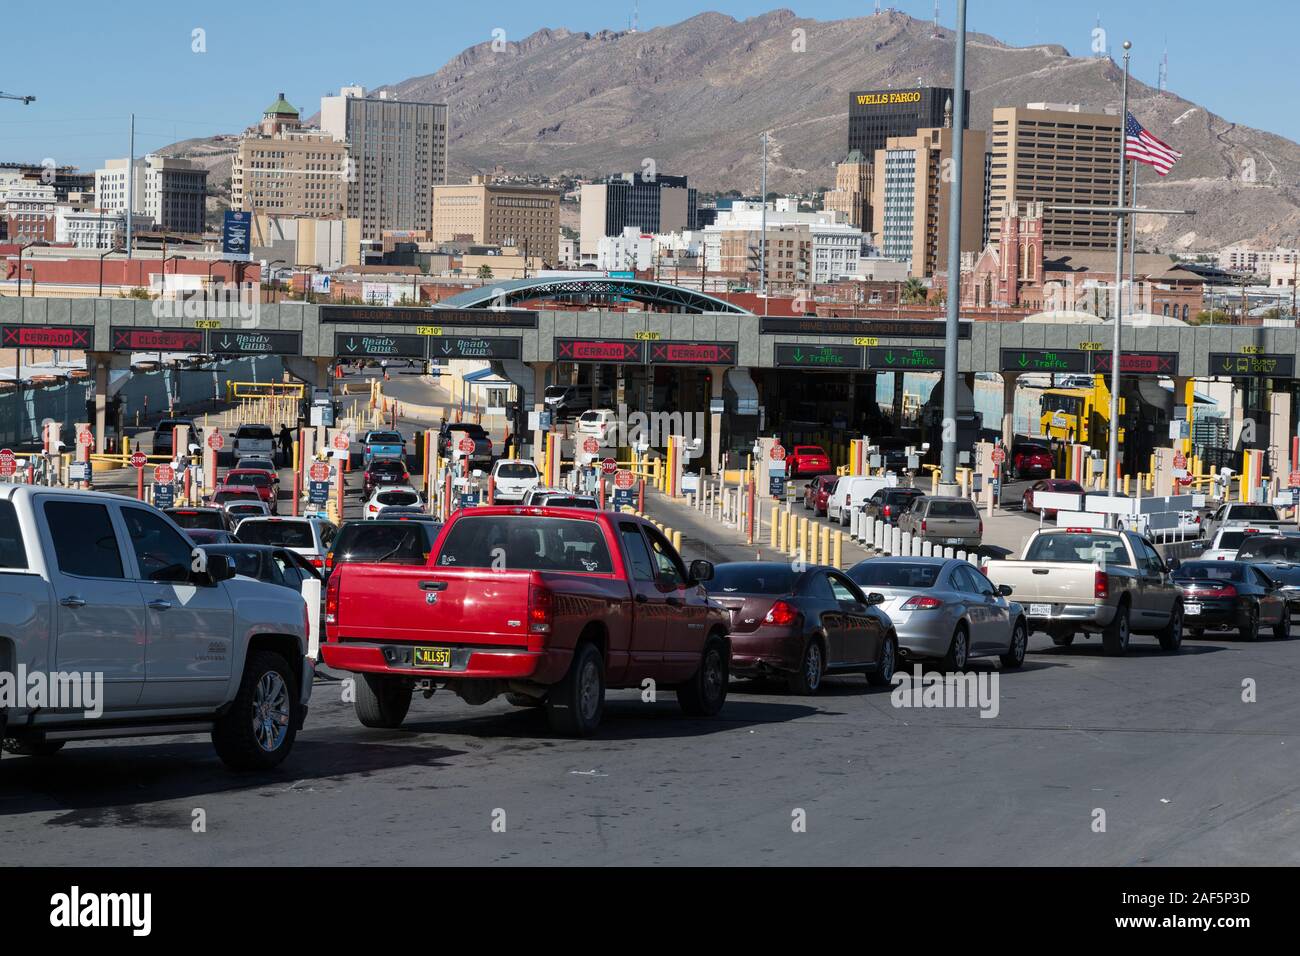 El Paso, Texas.  Automobiles Lined up to Enter the United States, Seen from Ciudad Juarez Side of the Border, Looking toward El Paso. Stock Photo